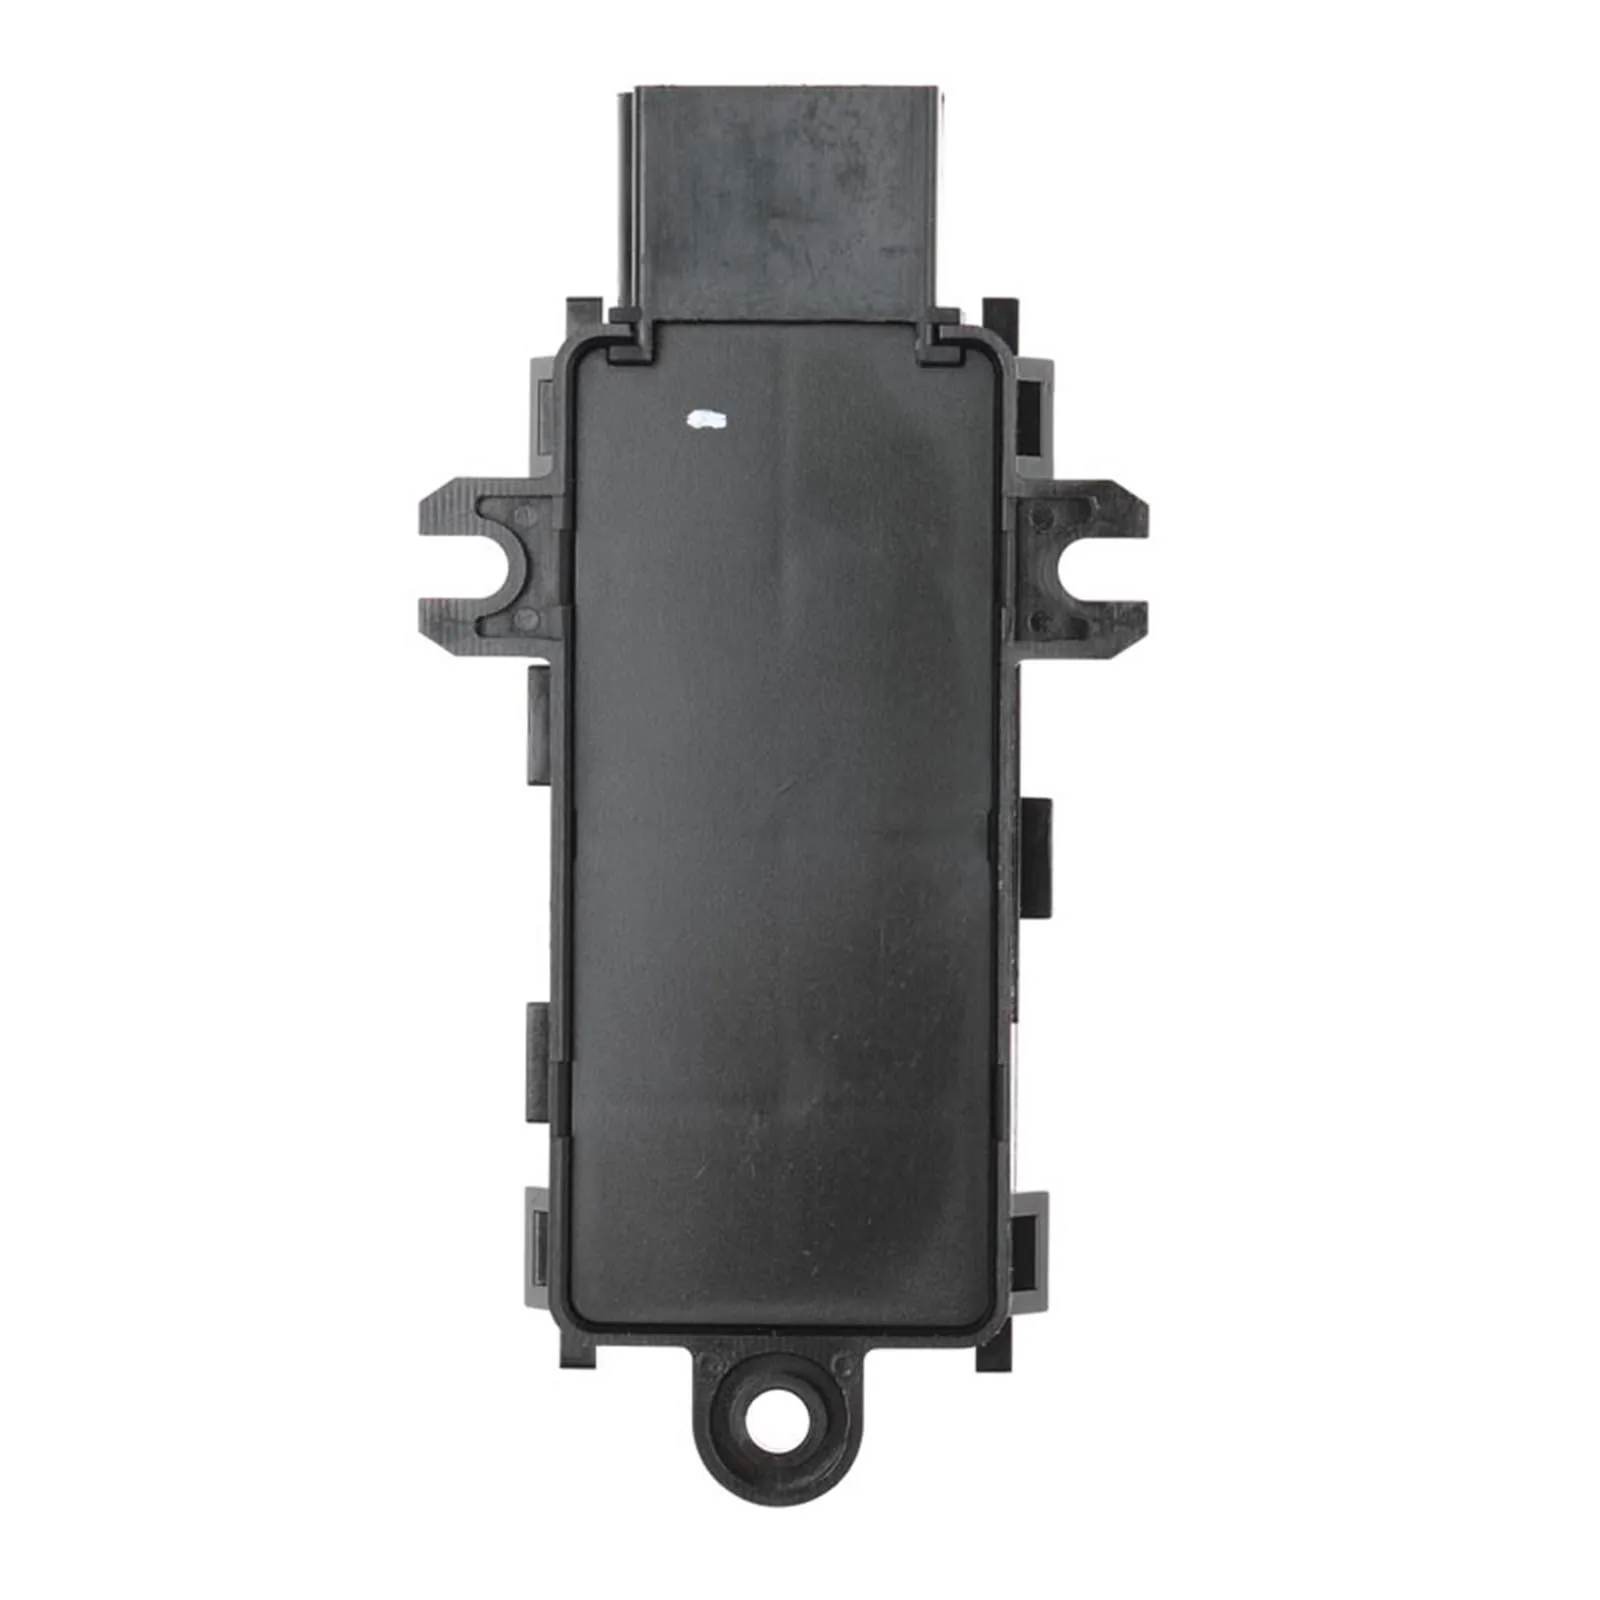 Seat Control Switch Interior Replacement Pss50256  12450256 Adjuster for  Siverado 1500 2500 3500   1500 2500 00